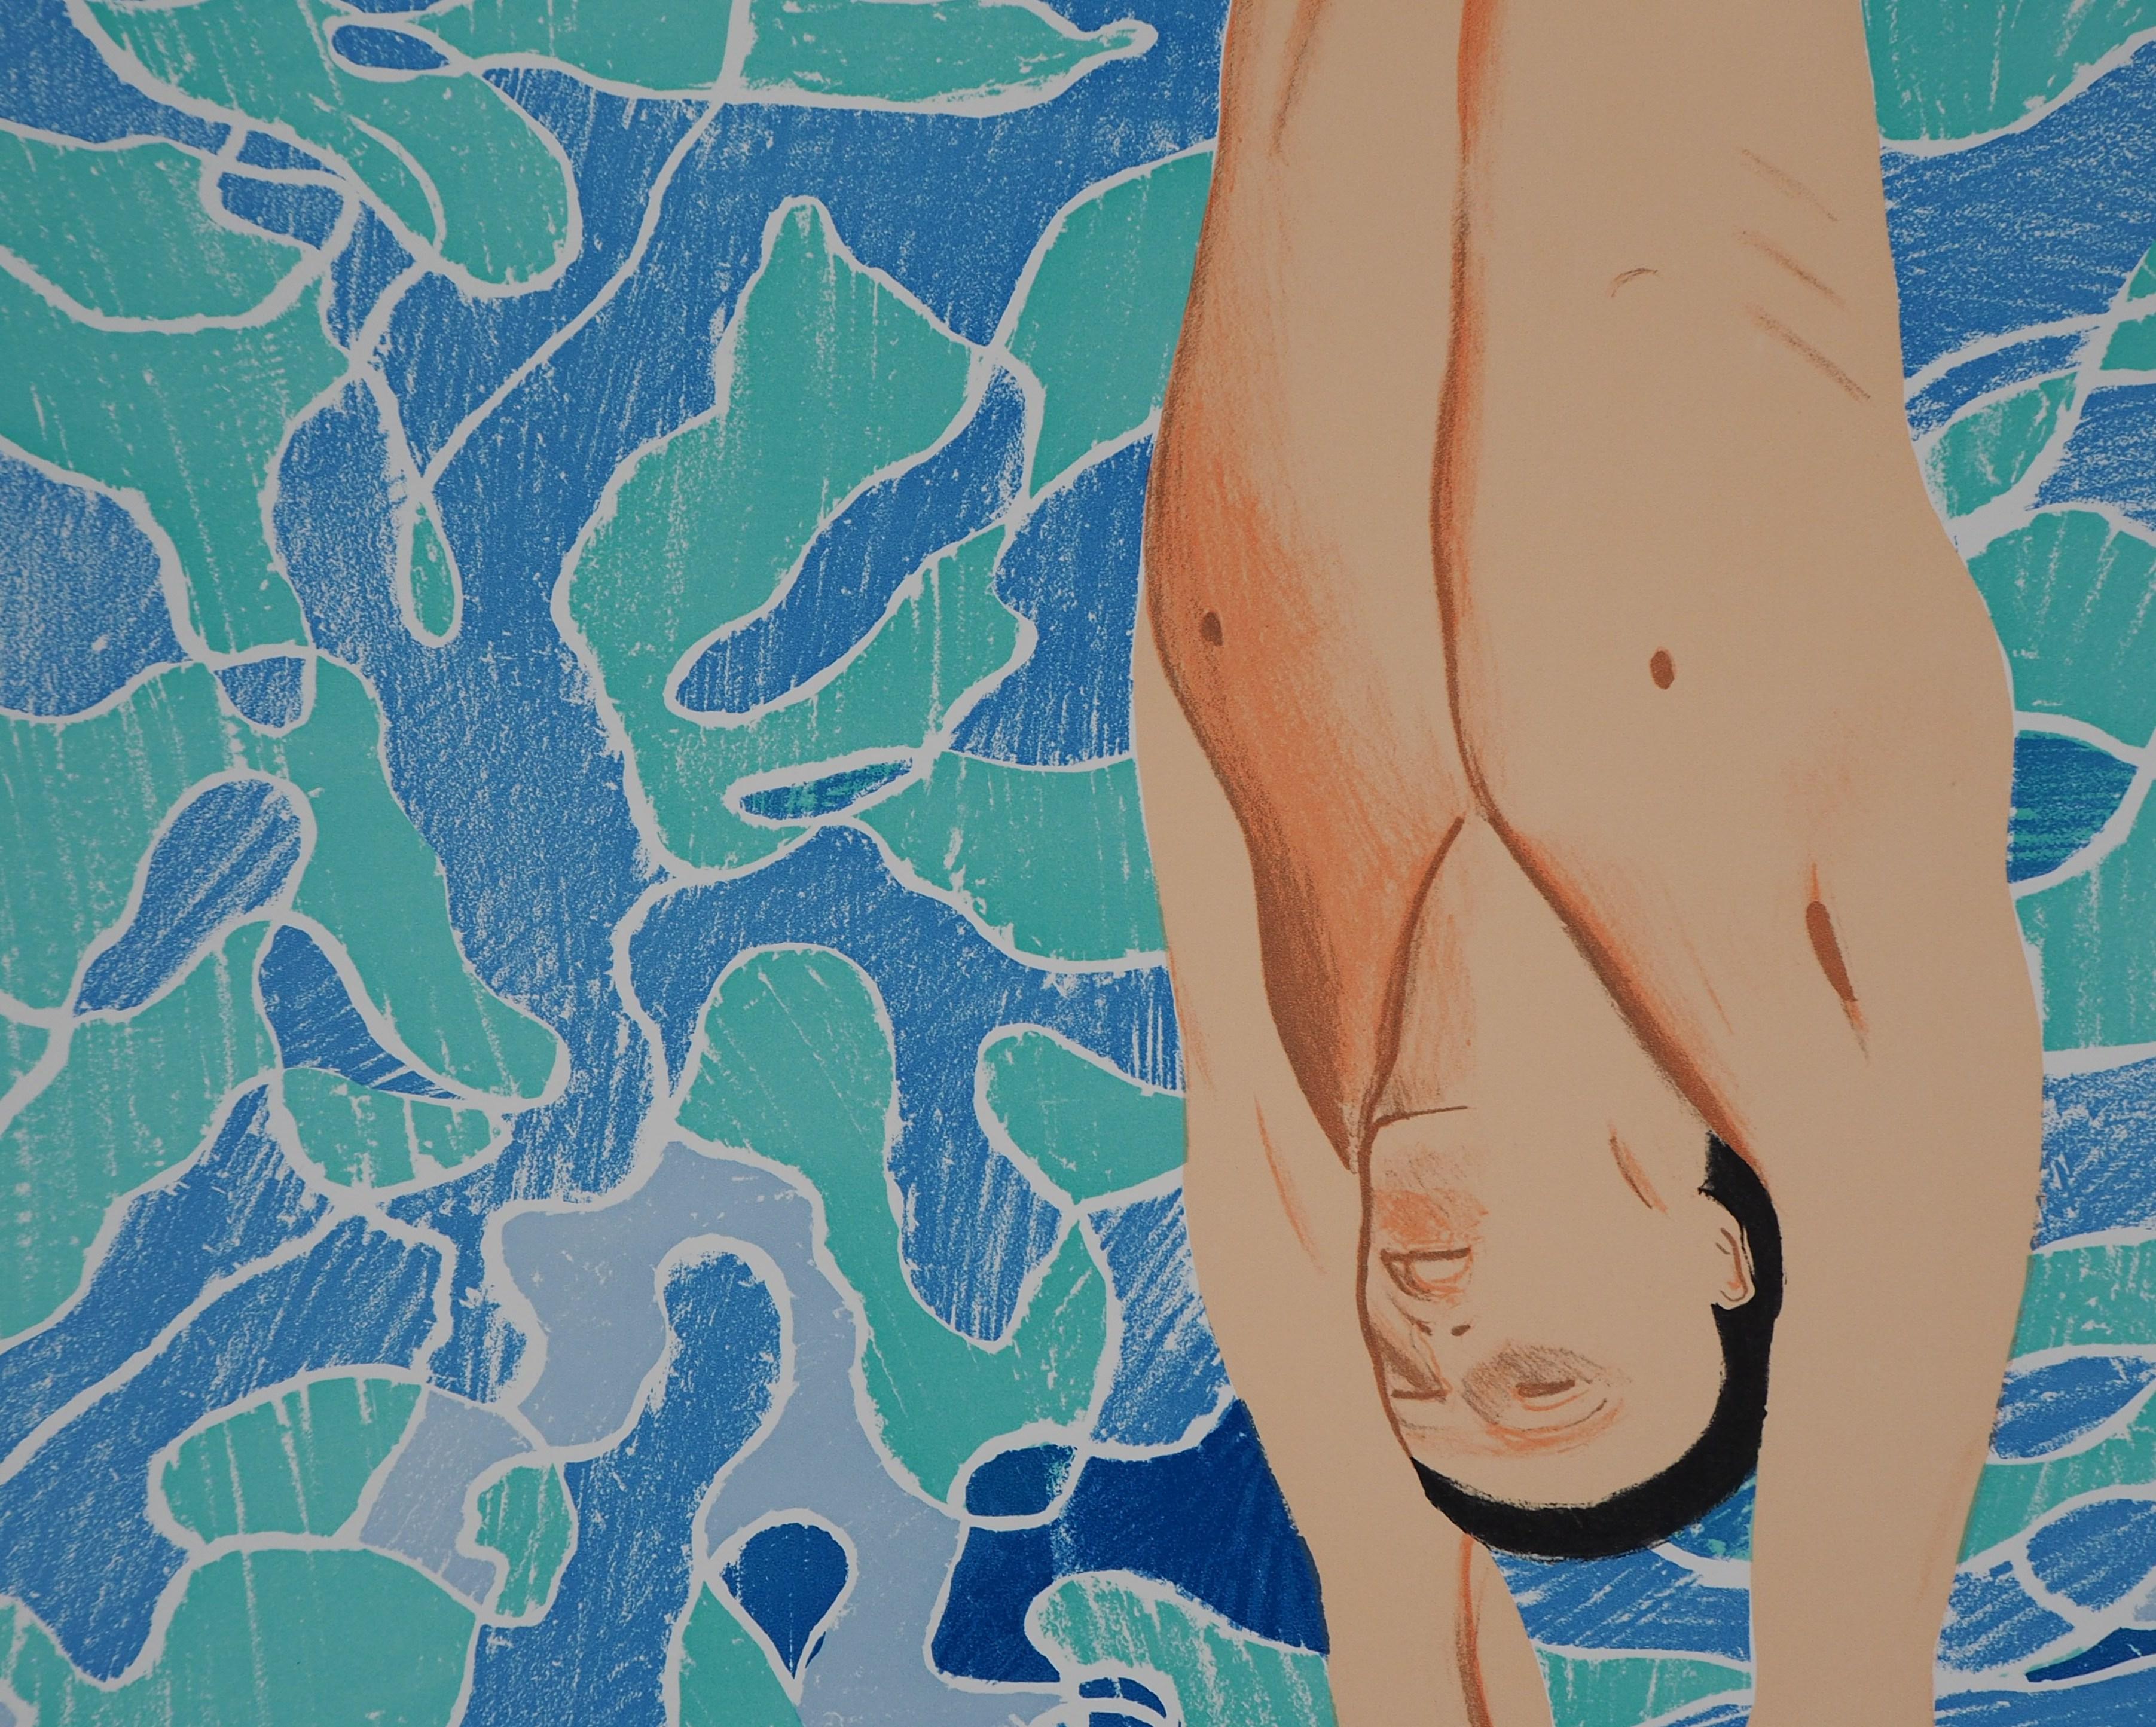 David HOCKNEY
Pool Diver

Lithograph
Signature printed in the plate
On heavy paper 101 x 64 cm (c. 40 x 26 inch)
Made for the Olympic Games in Munich, 1972

Excellent condition